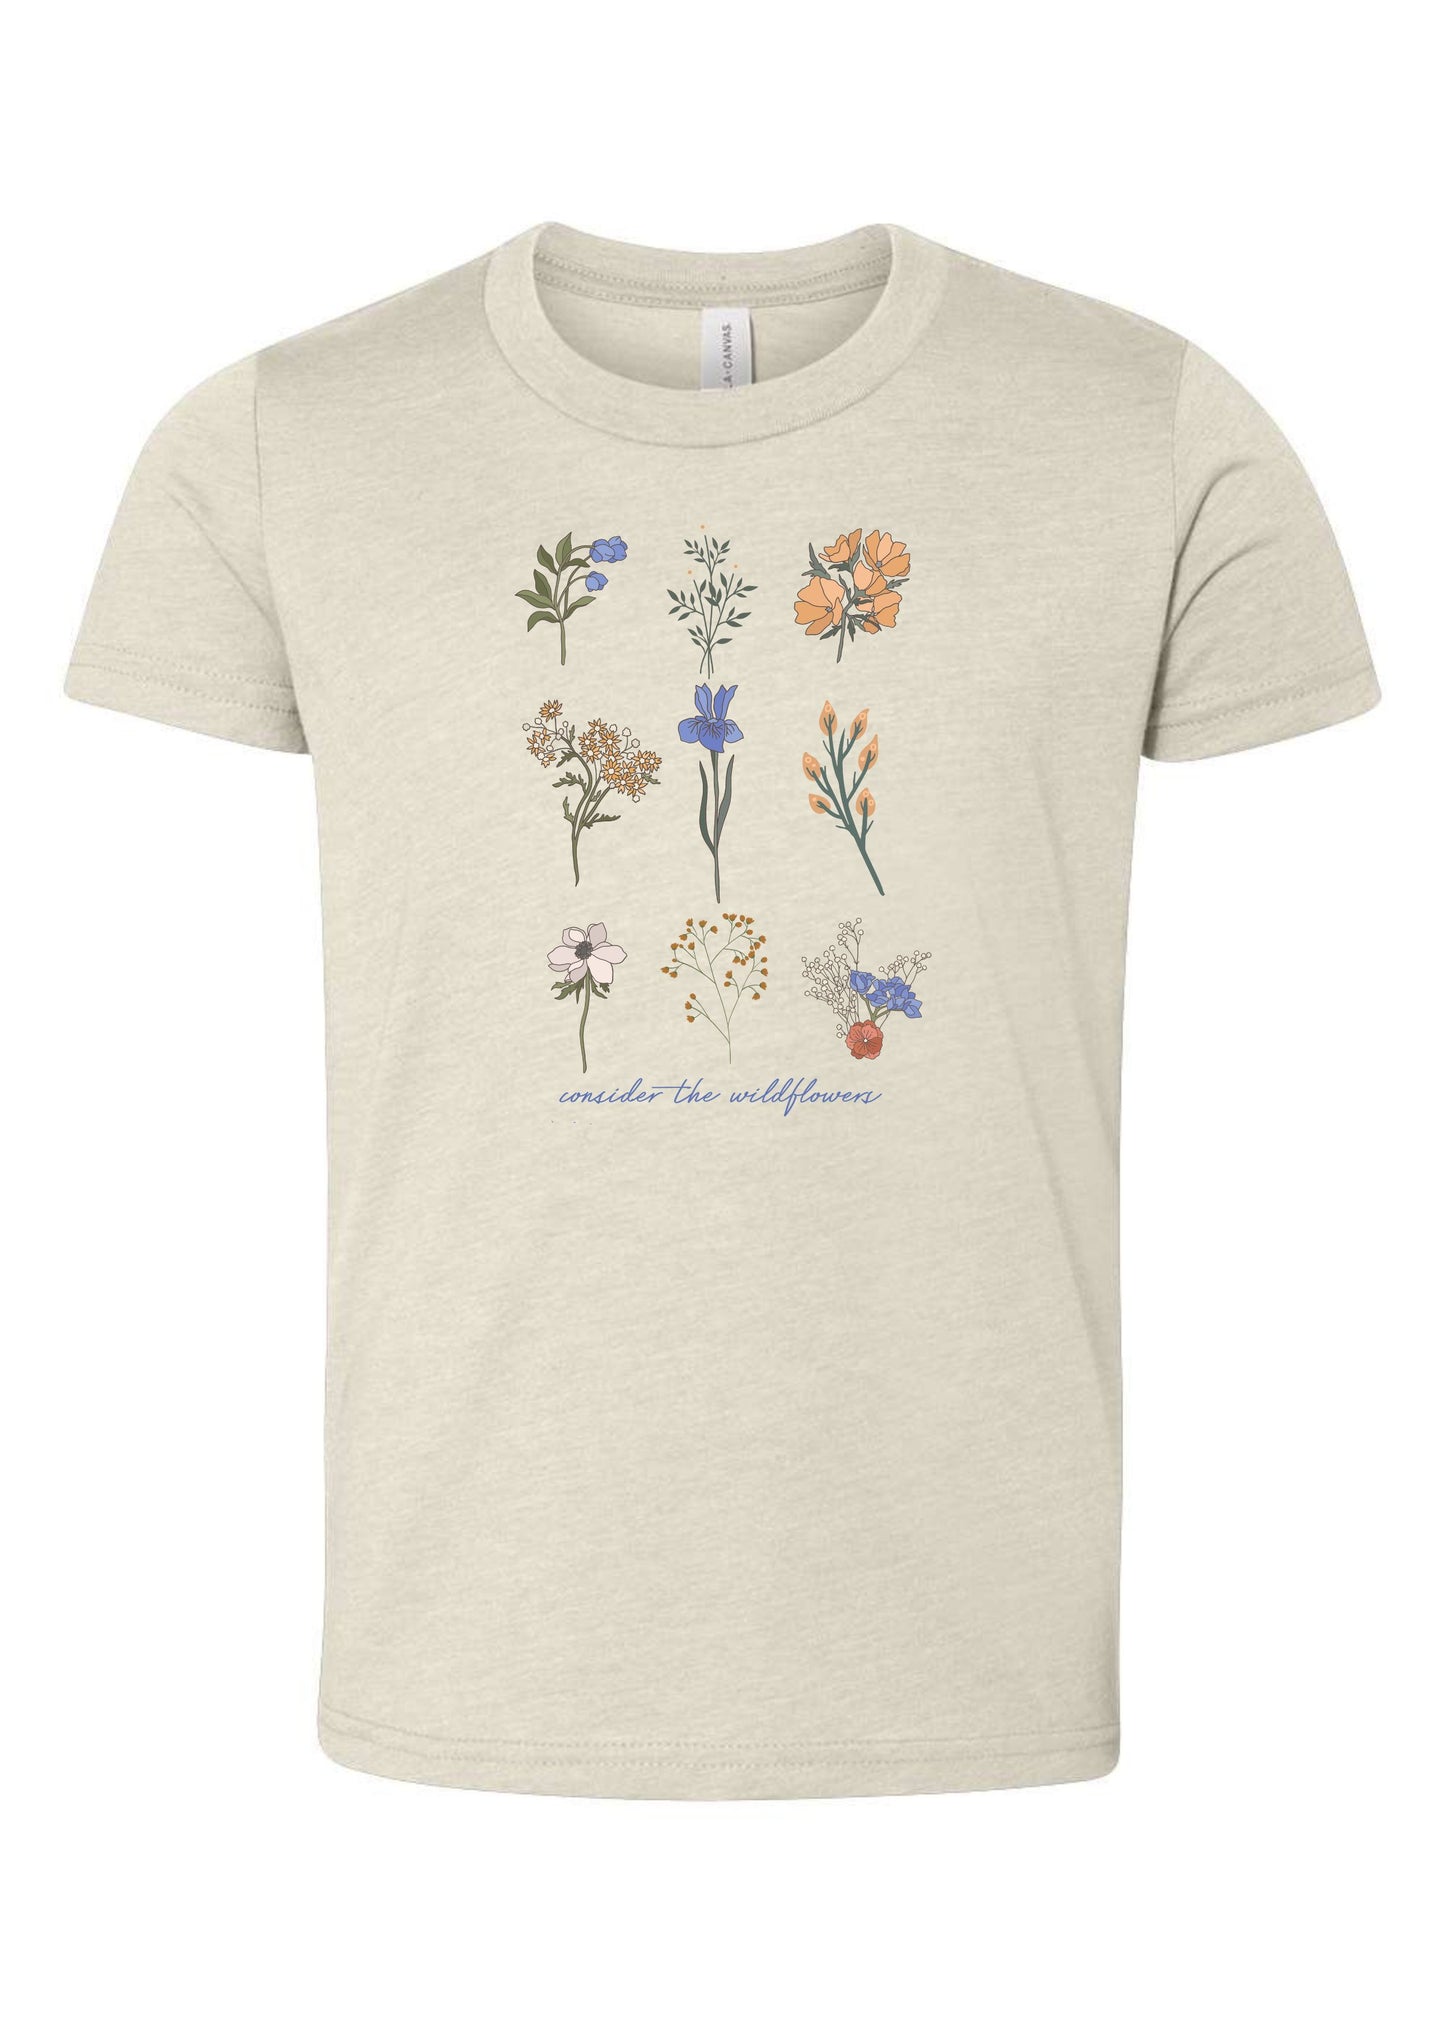 Consider The Wildflowers | Kids Tee | RTS-Kids Tees-Sister Shirts-Sister Shirts, Cute & Custom Tees for Mama & Littles in Trussville, Alabama.